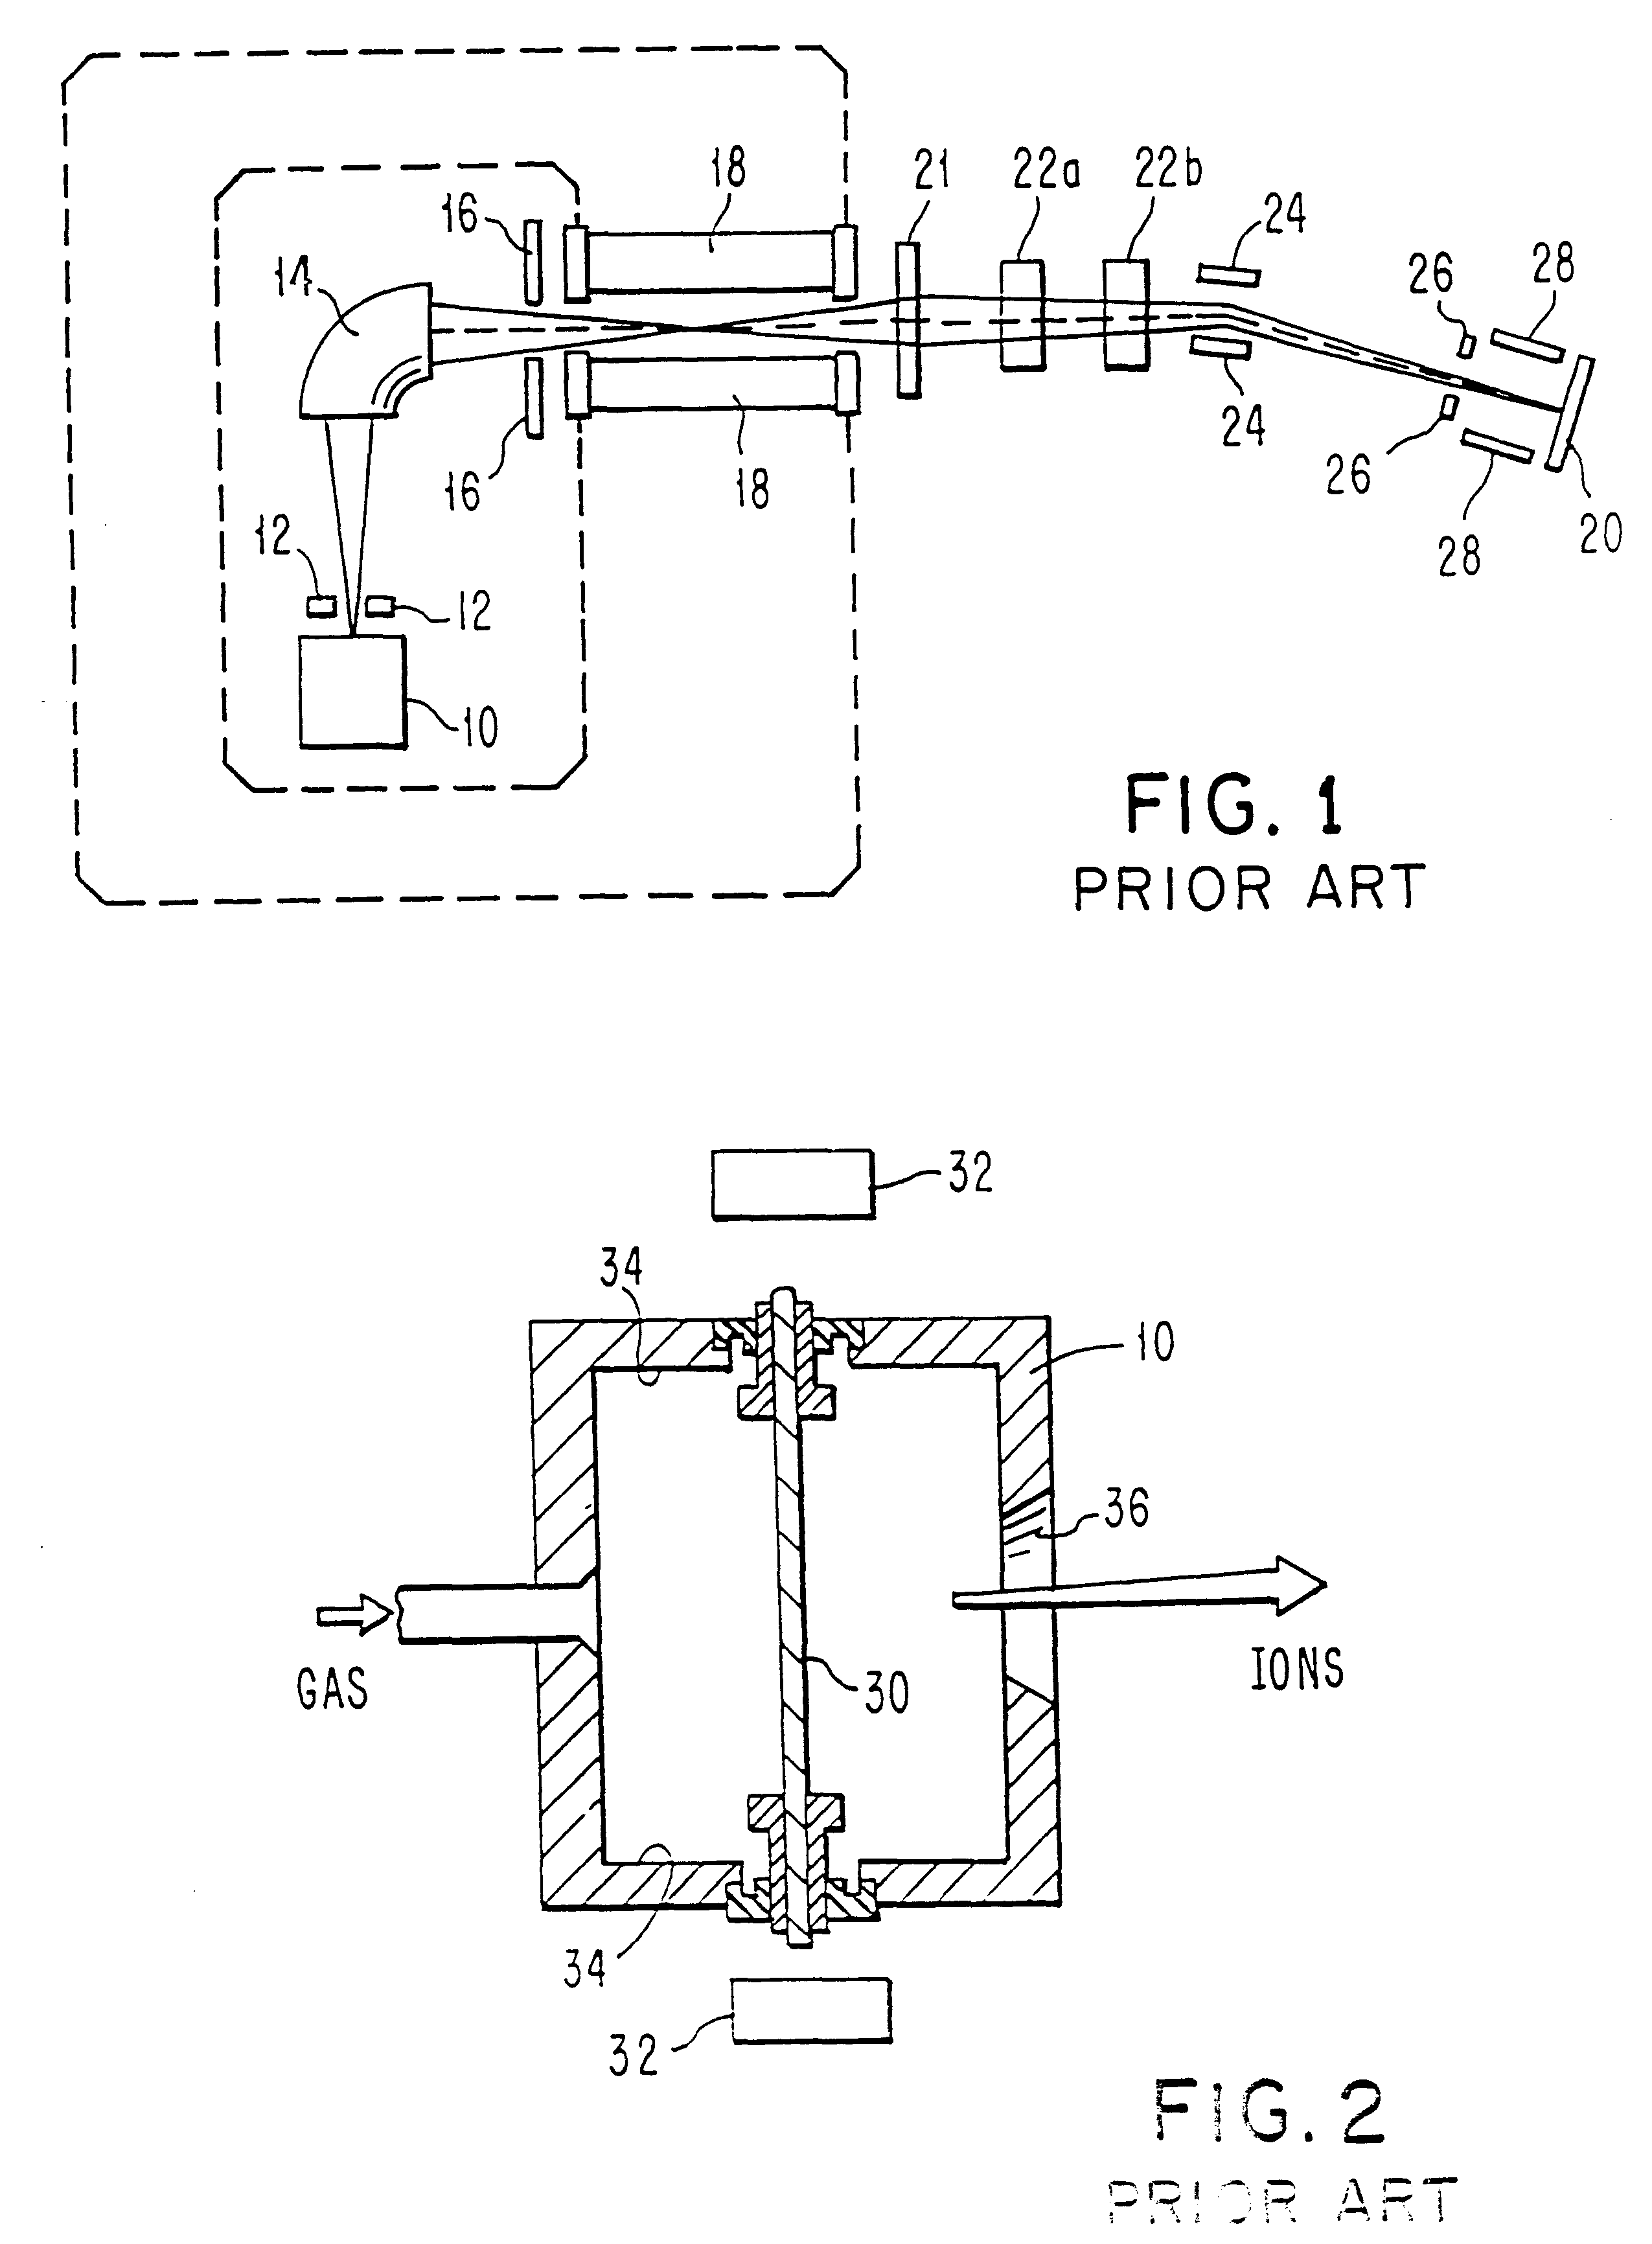 Method to operate GEF4 gas in hot cathode discharge ion sources